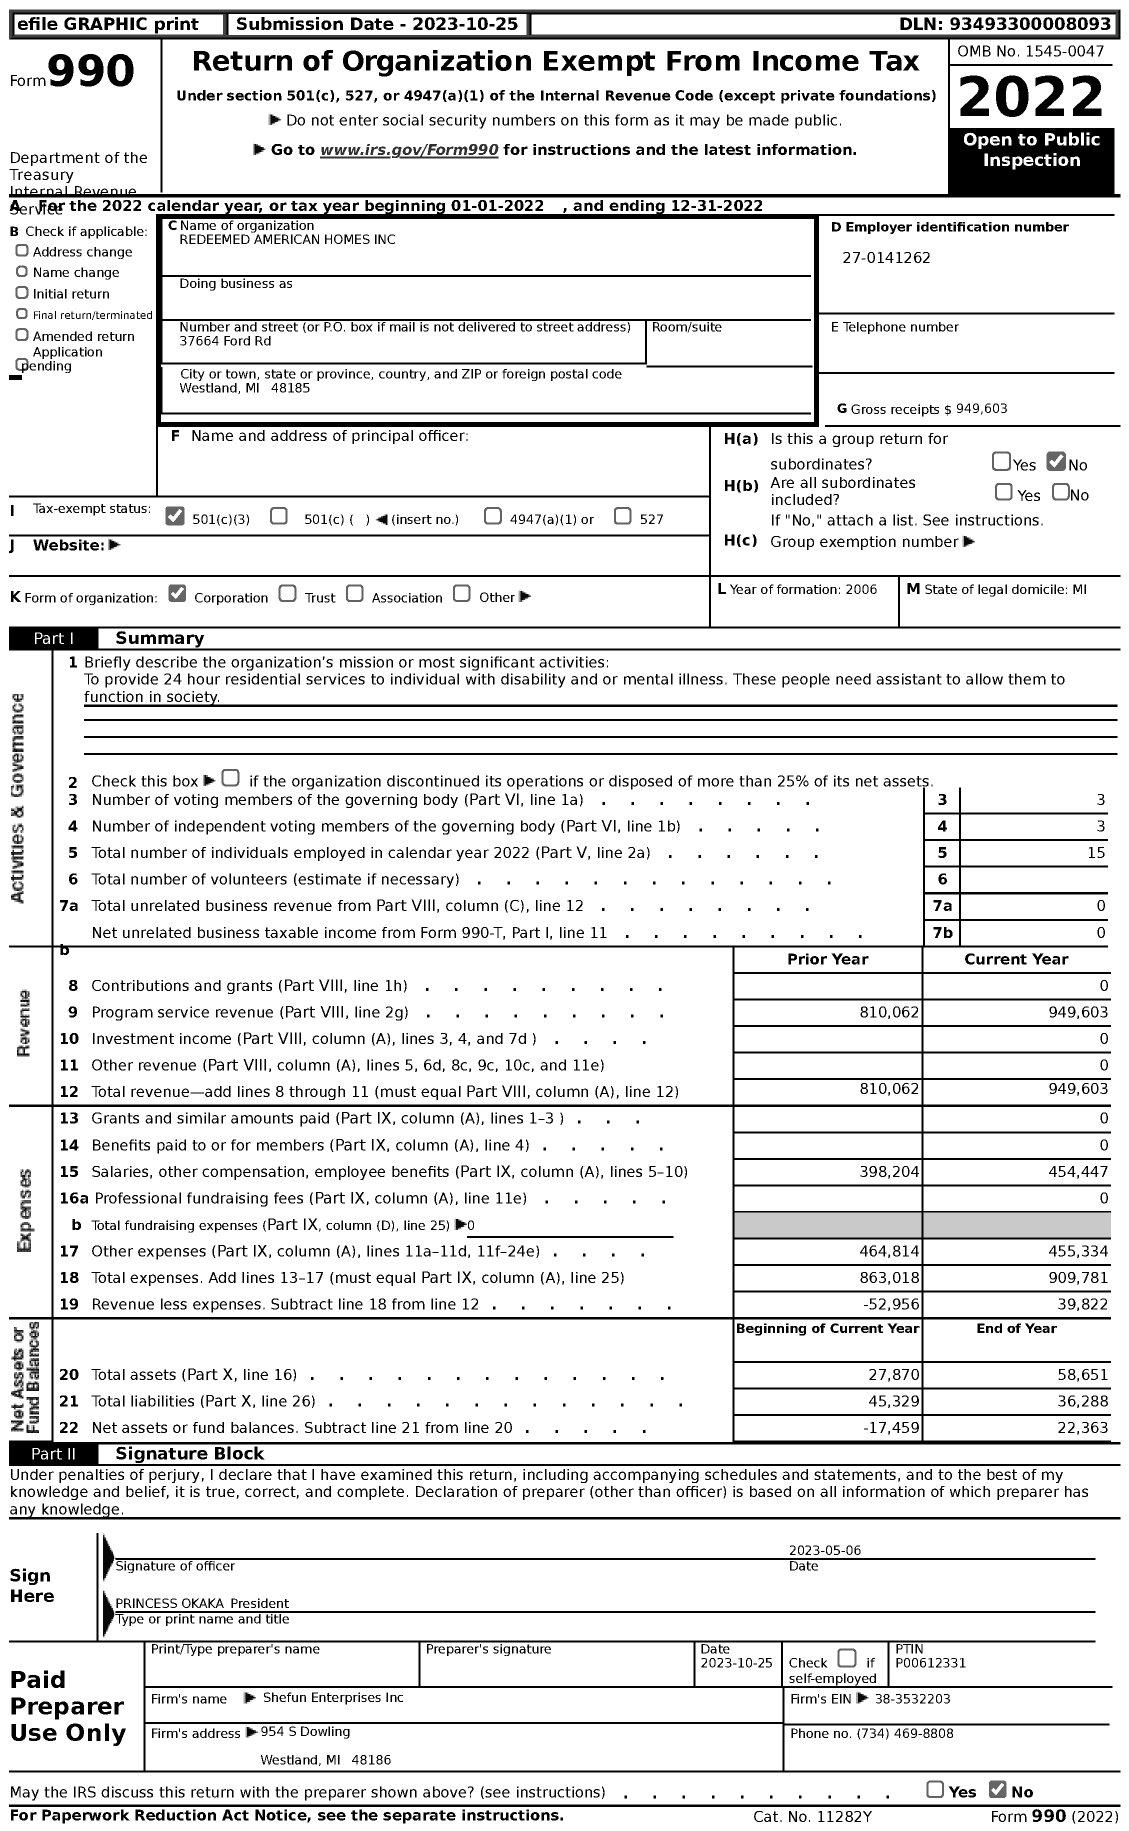 Image of first page of 2022 Form 990 for Redeemed American Homes